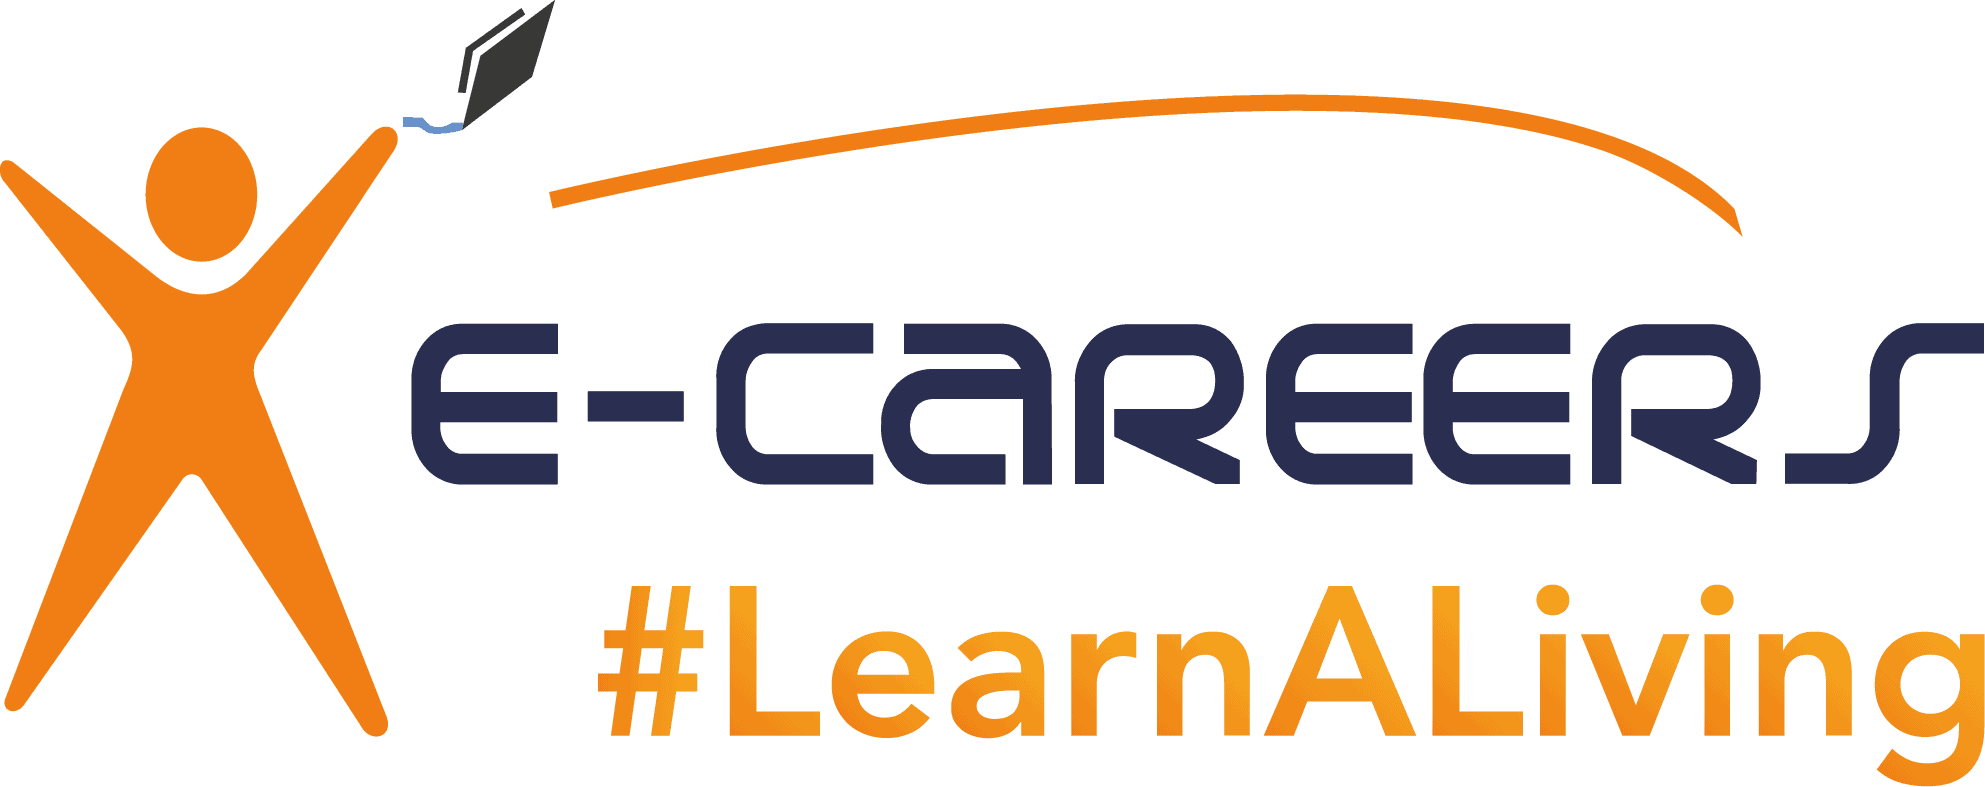 e-careers #LearnALiving